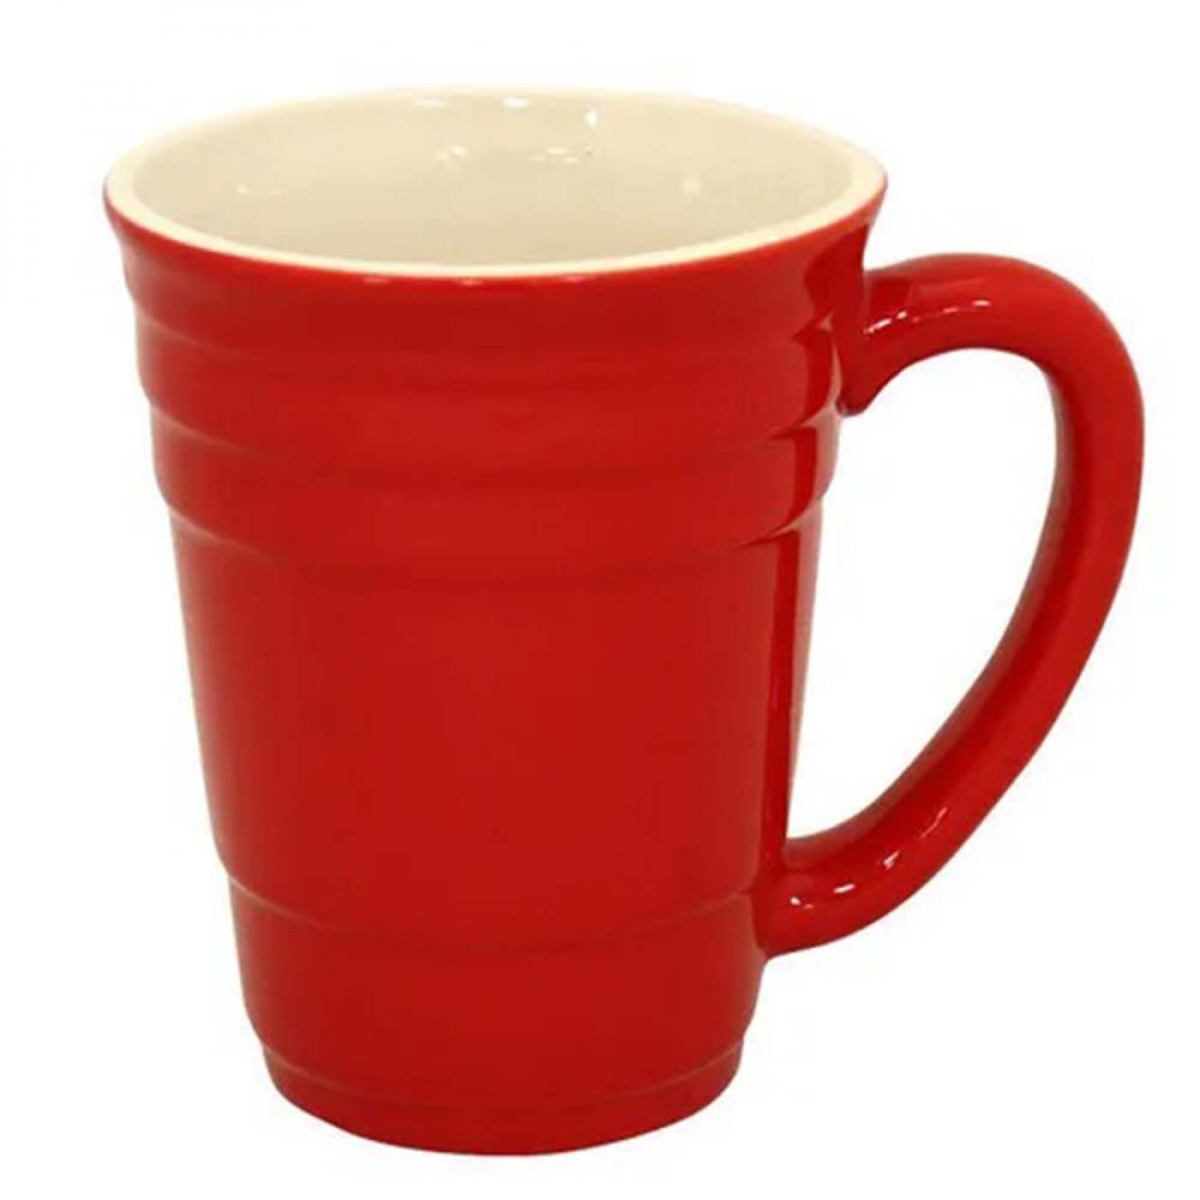 Picture of Drinking 835922 16 oz Red Party Cup Ceramic Mug